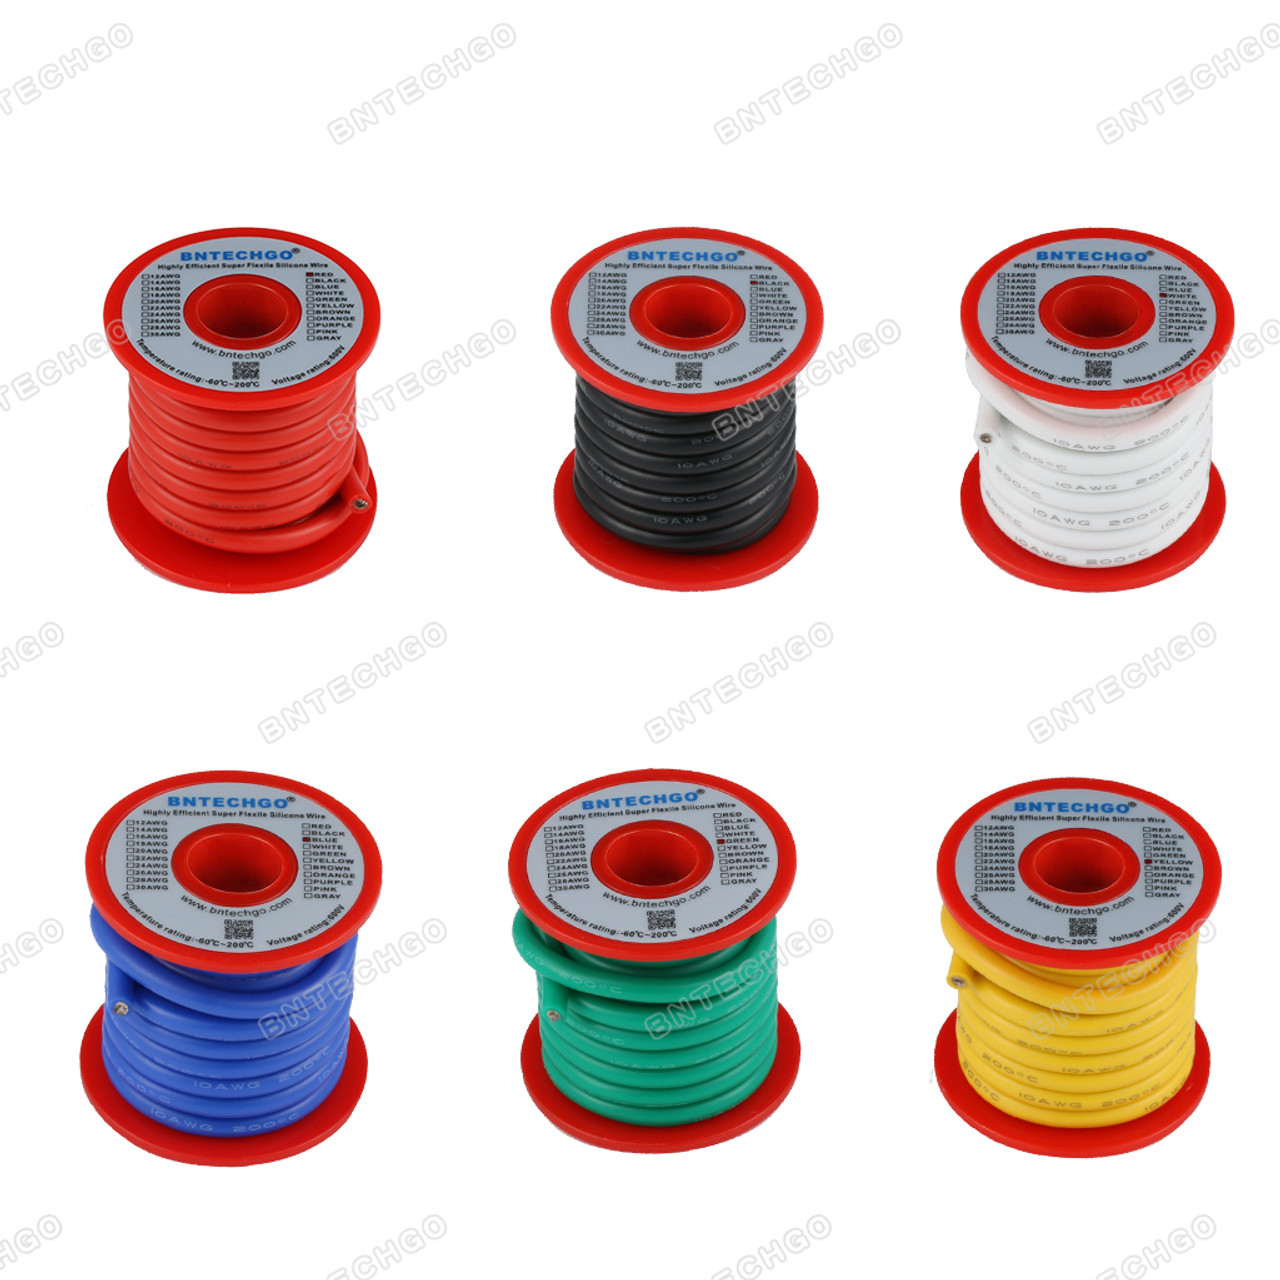 BNTECHGO 30 Gauge Silicone wire red and black each 10ft black